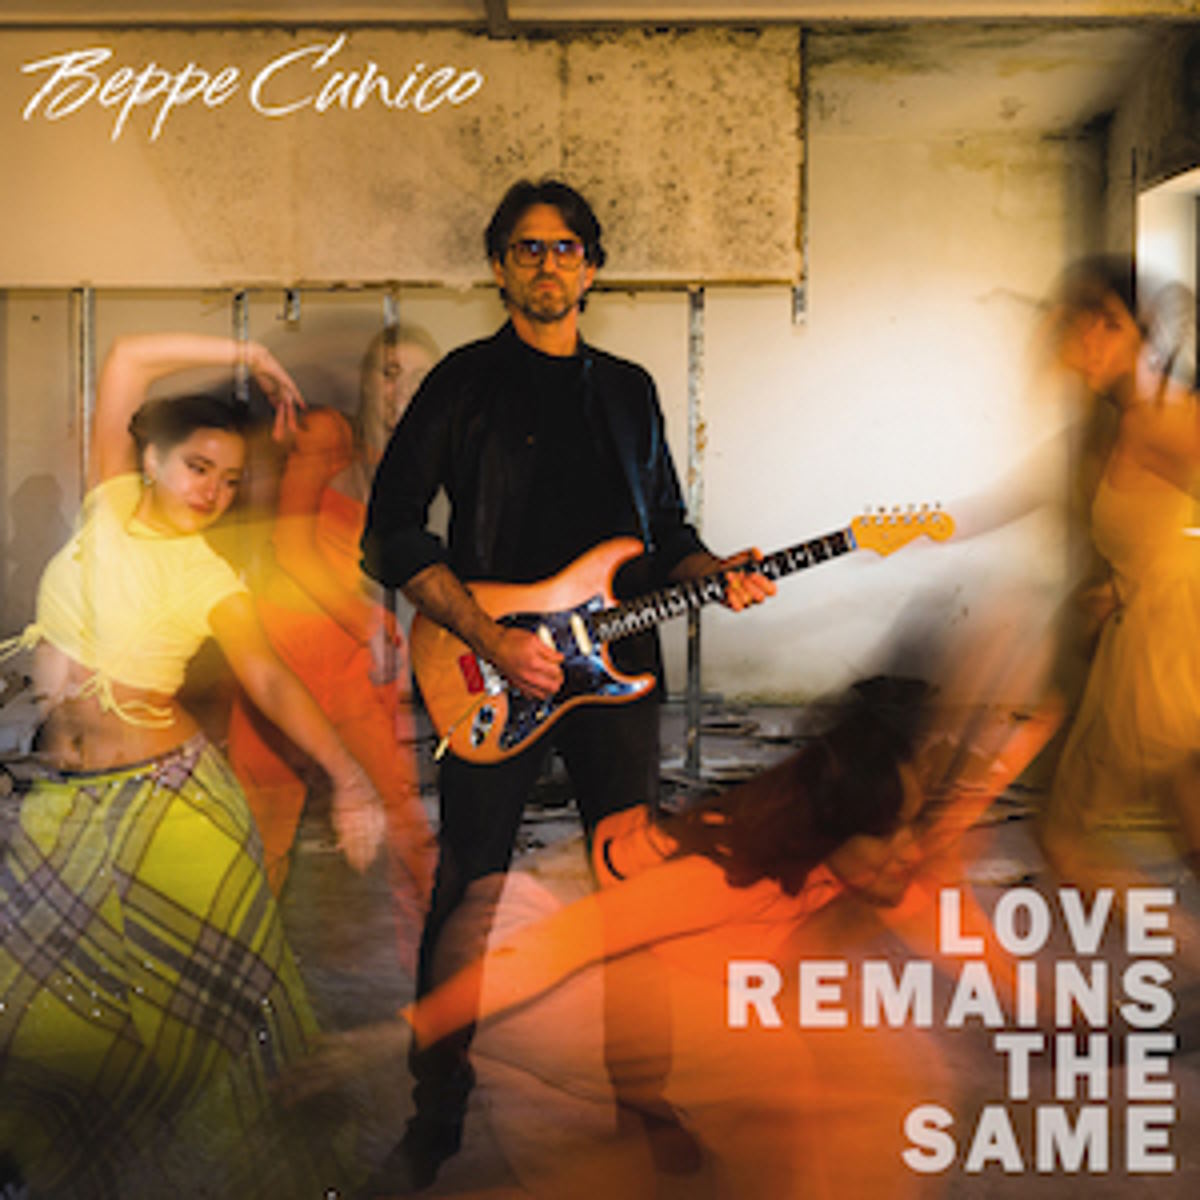 Beppe Cunico - “Love remains the same”